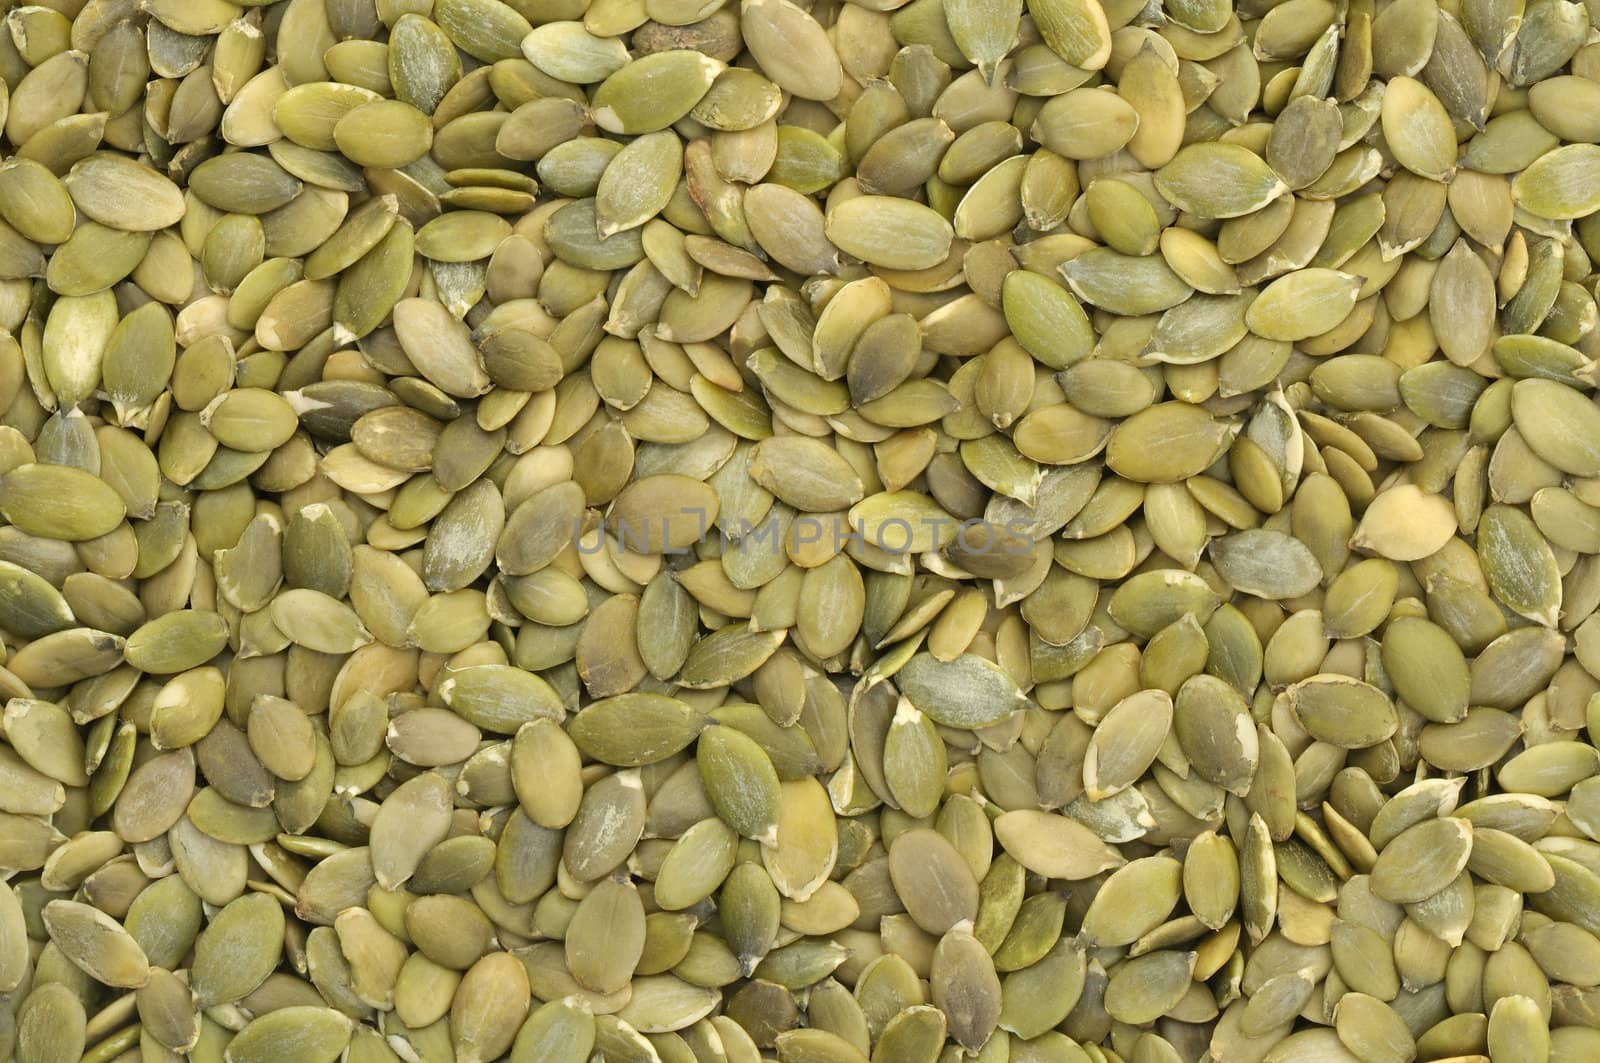 Top view of hulled pumpkin seeds in natural light